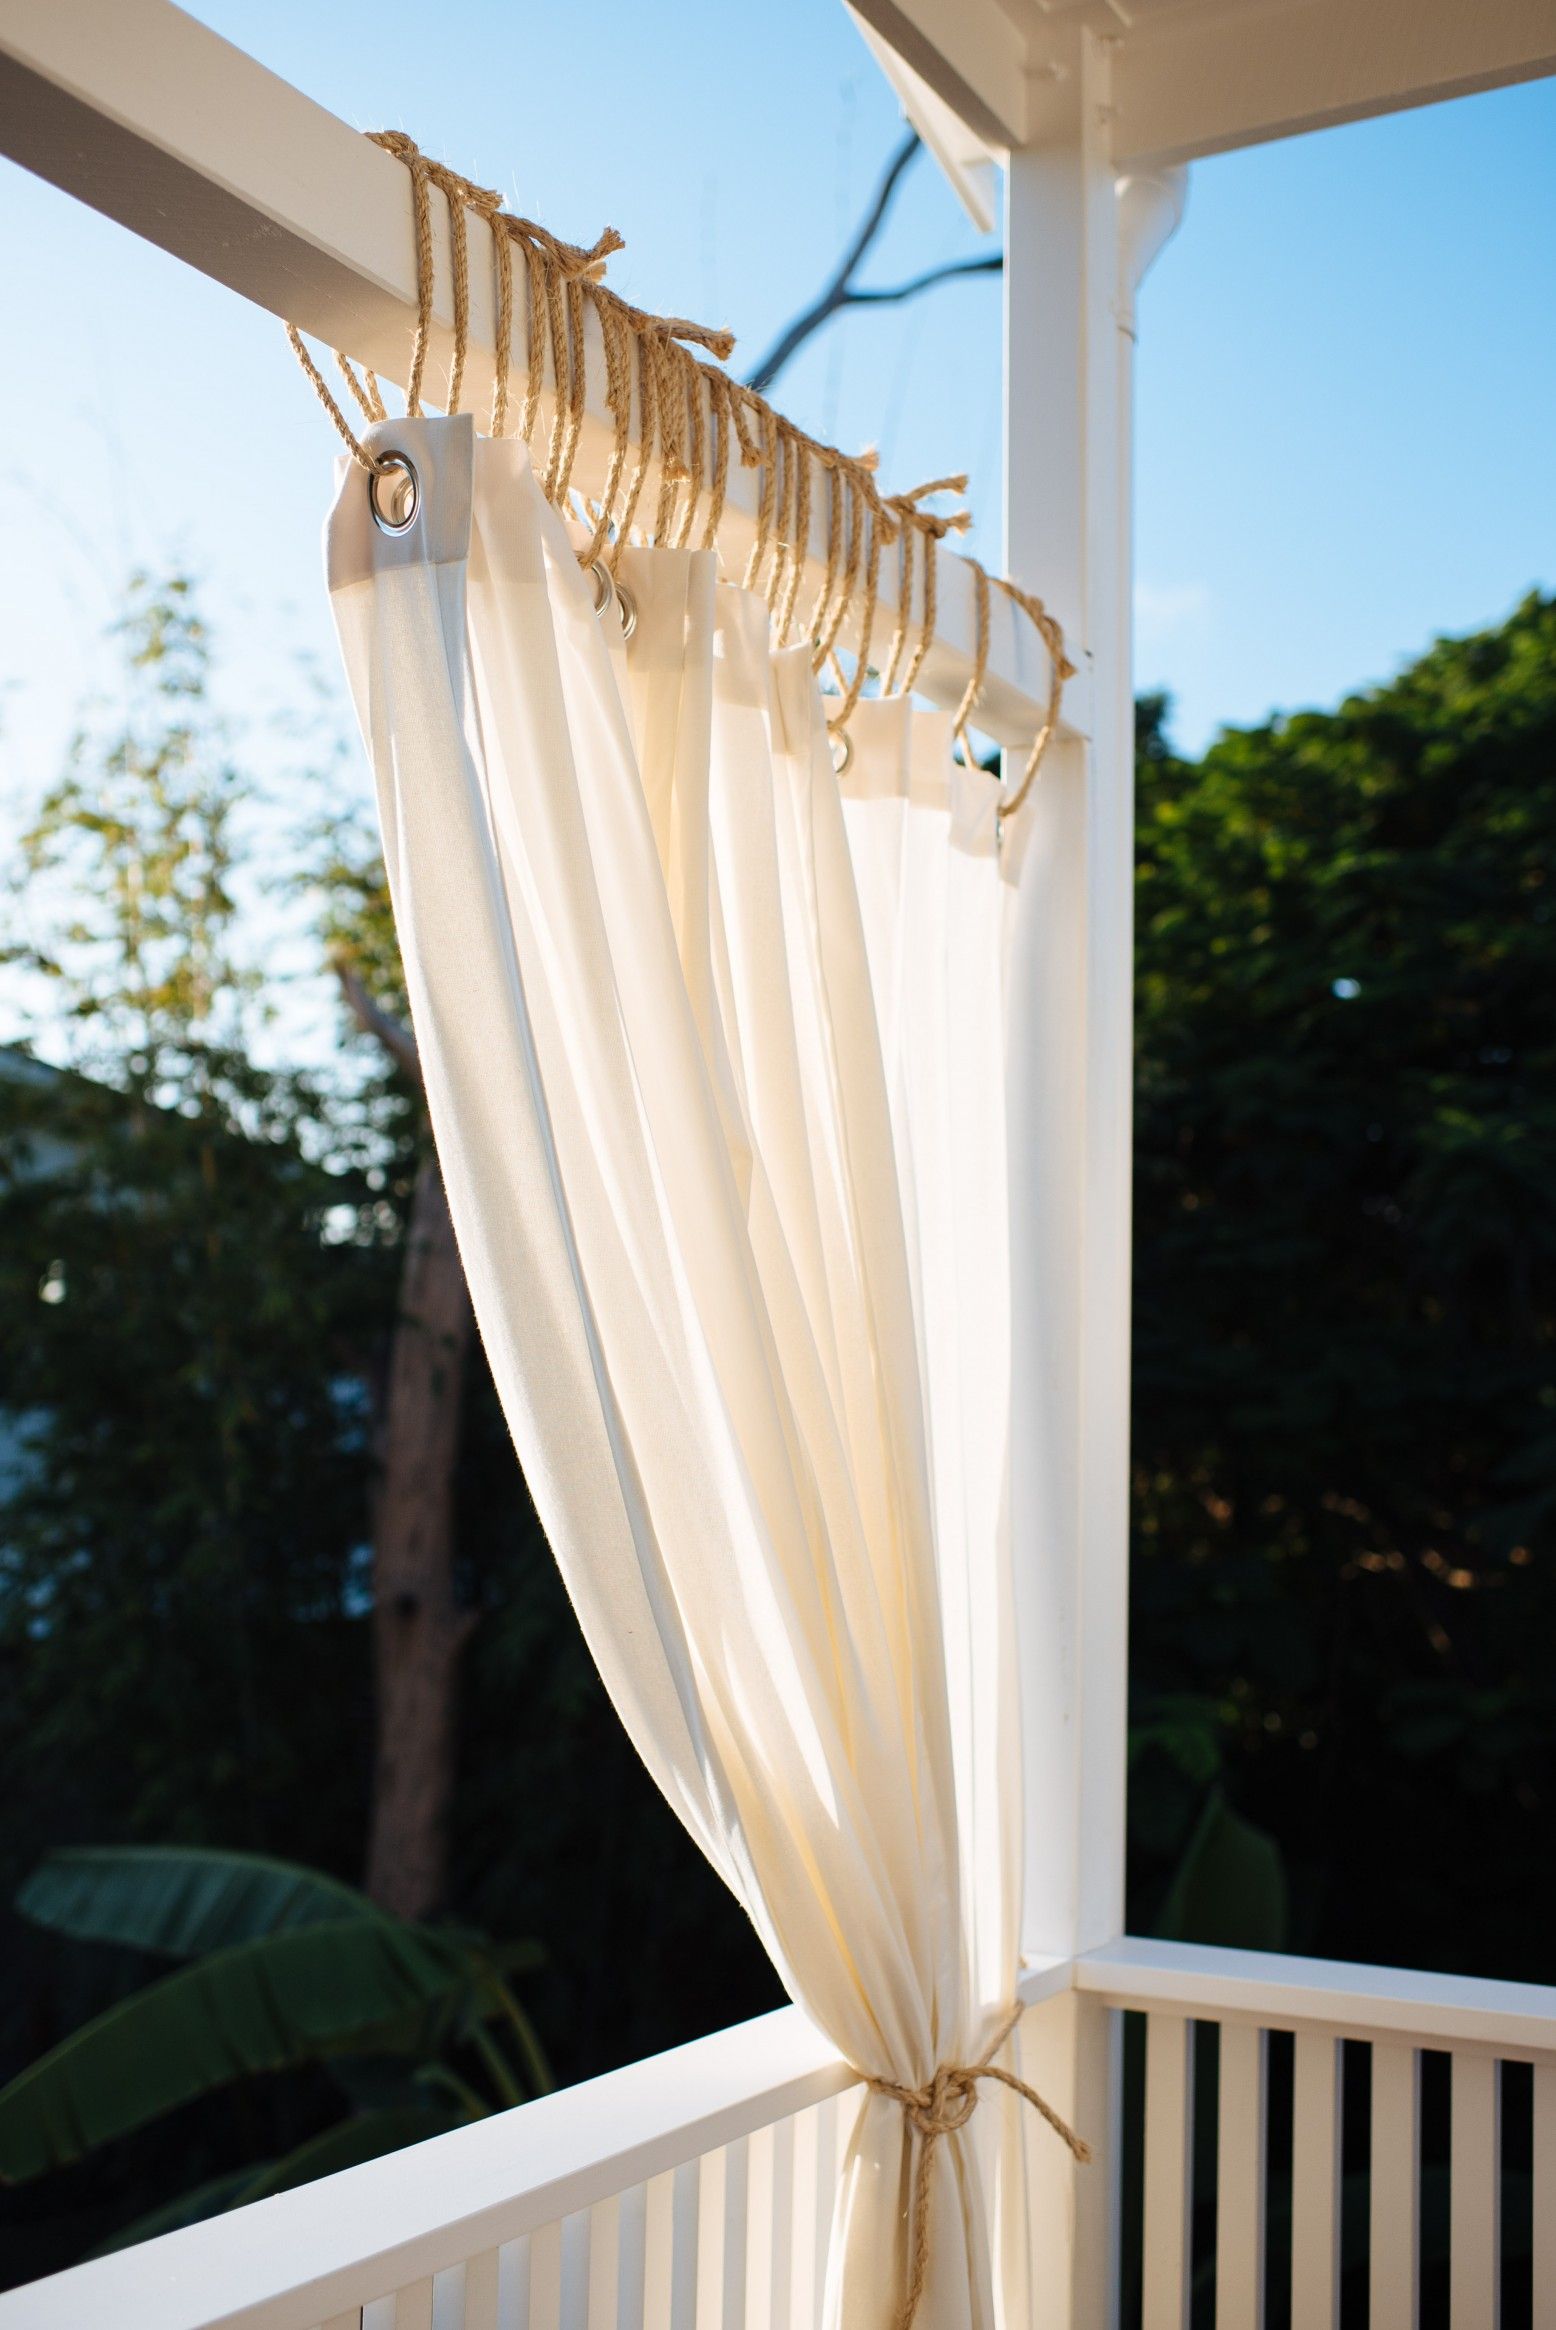 Outdoor Serenity: Enjoy Nature with Outdoor Curtains